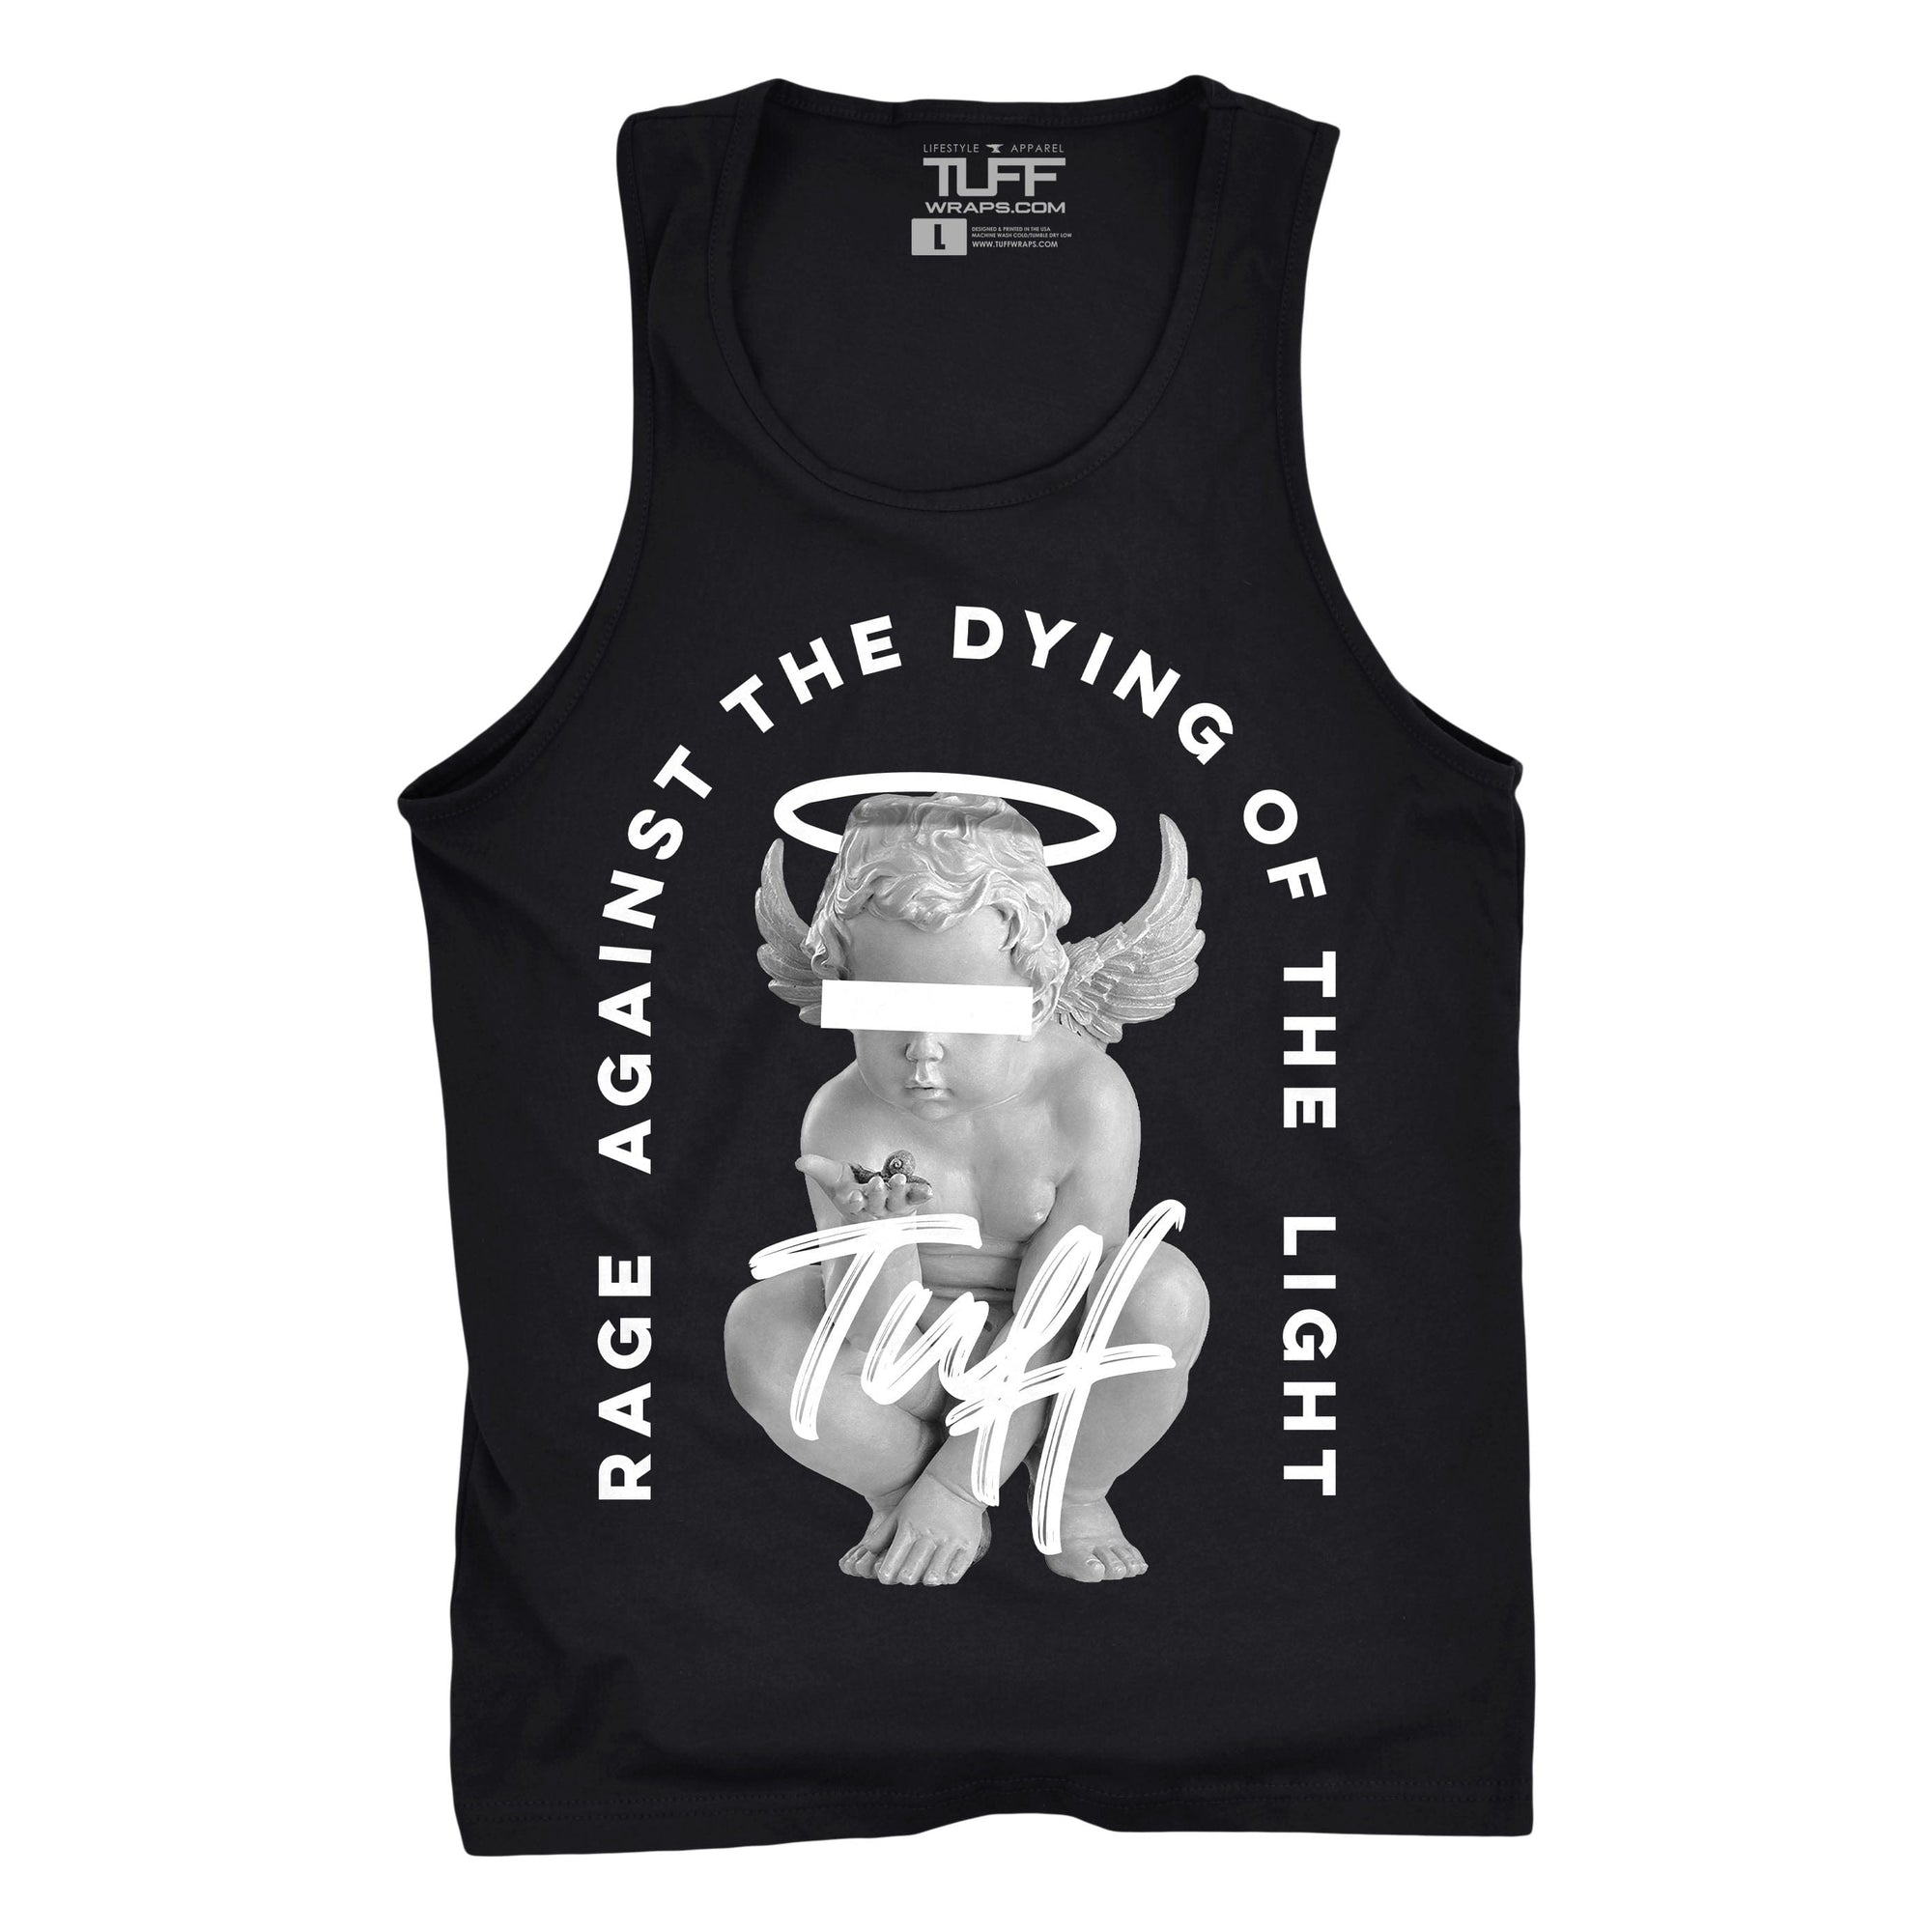 Rage Against the Dying of the Light Tank Men's Tank Tops